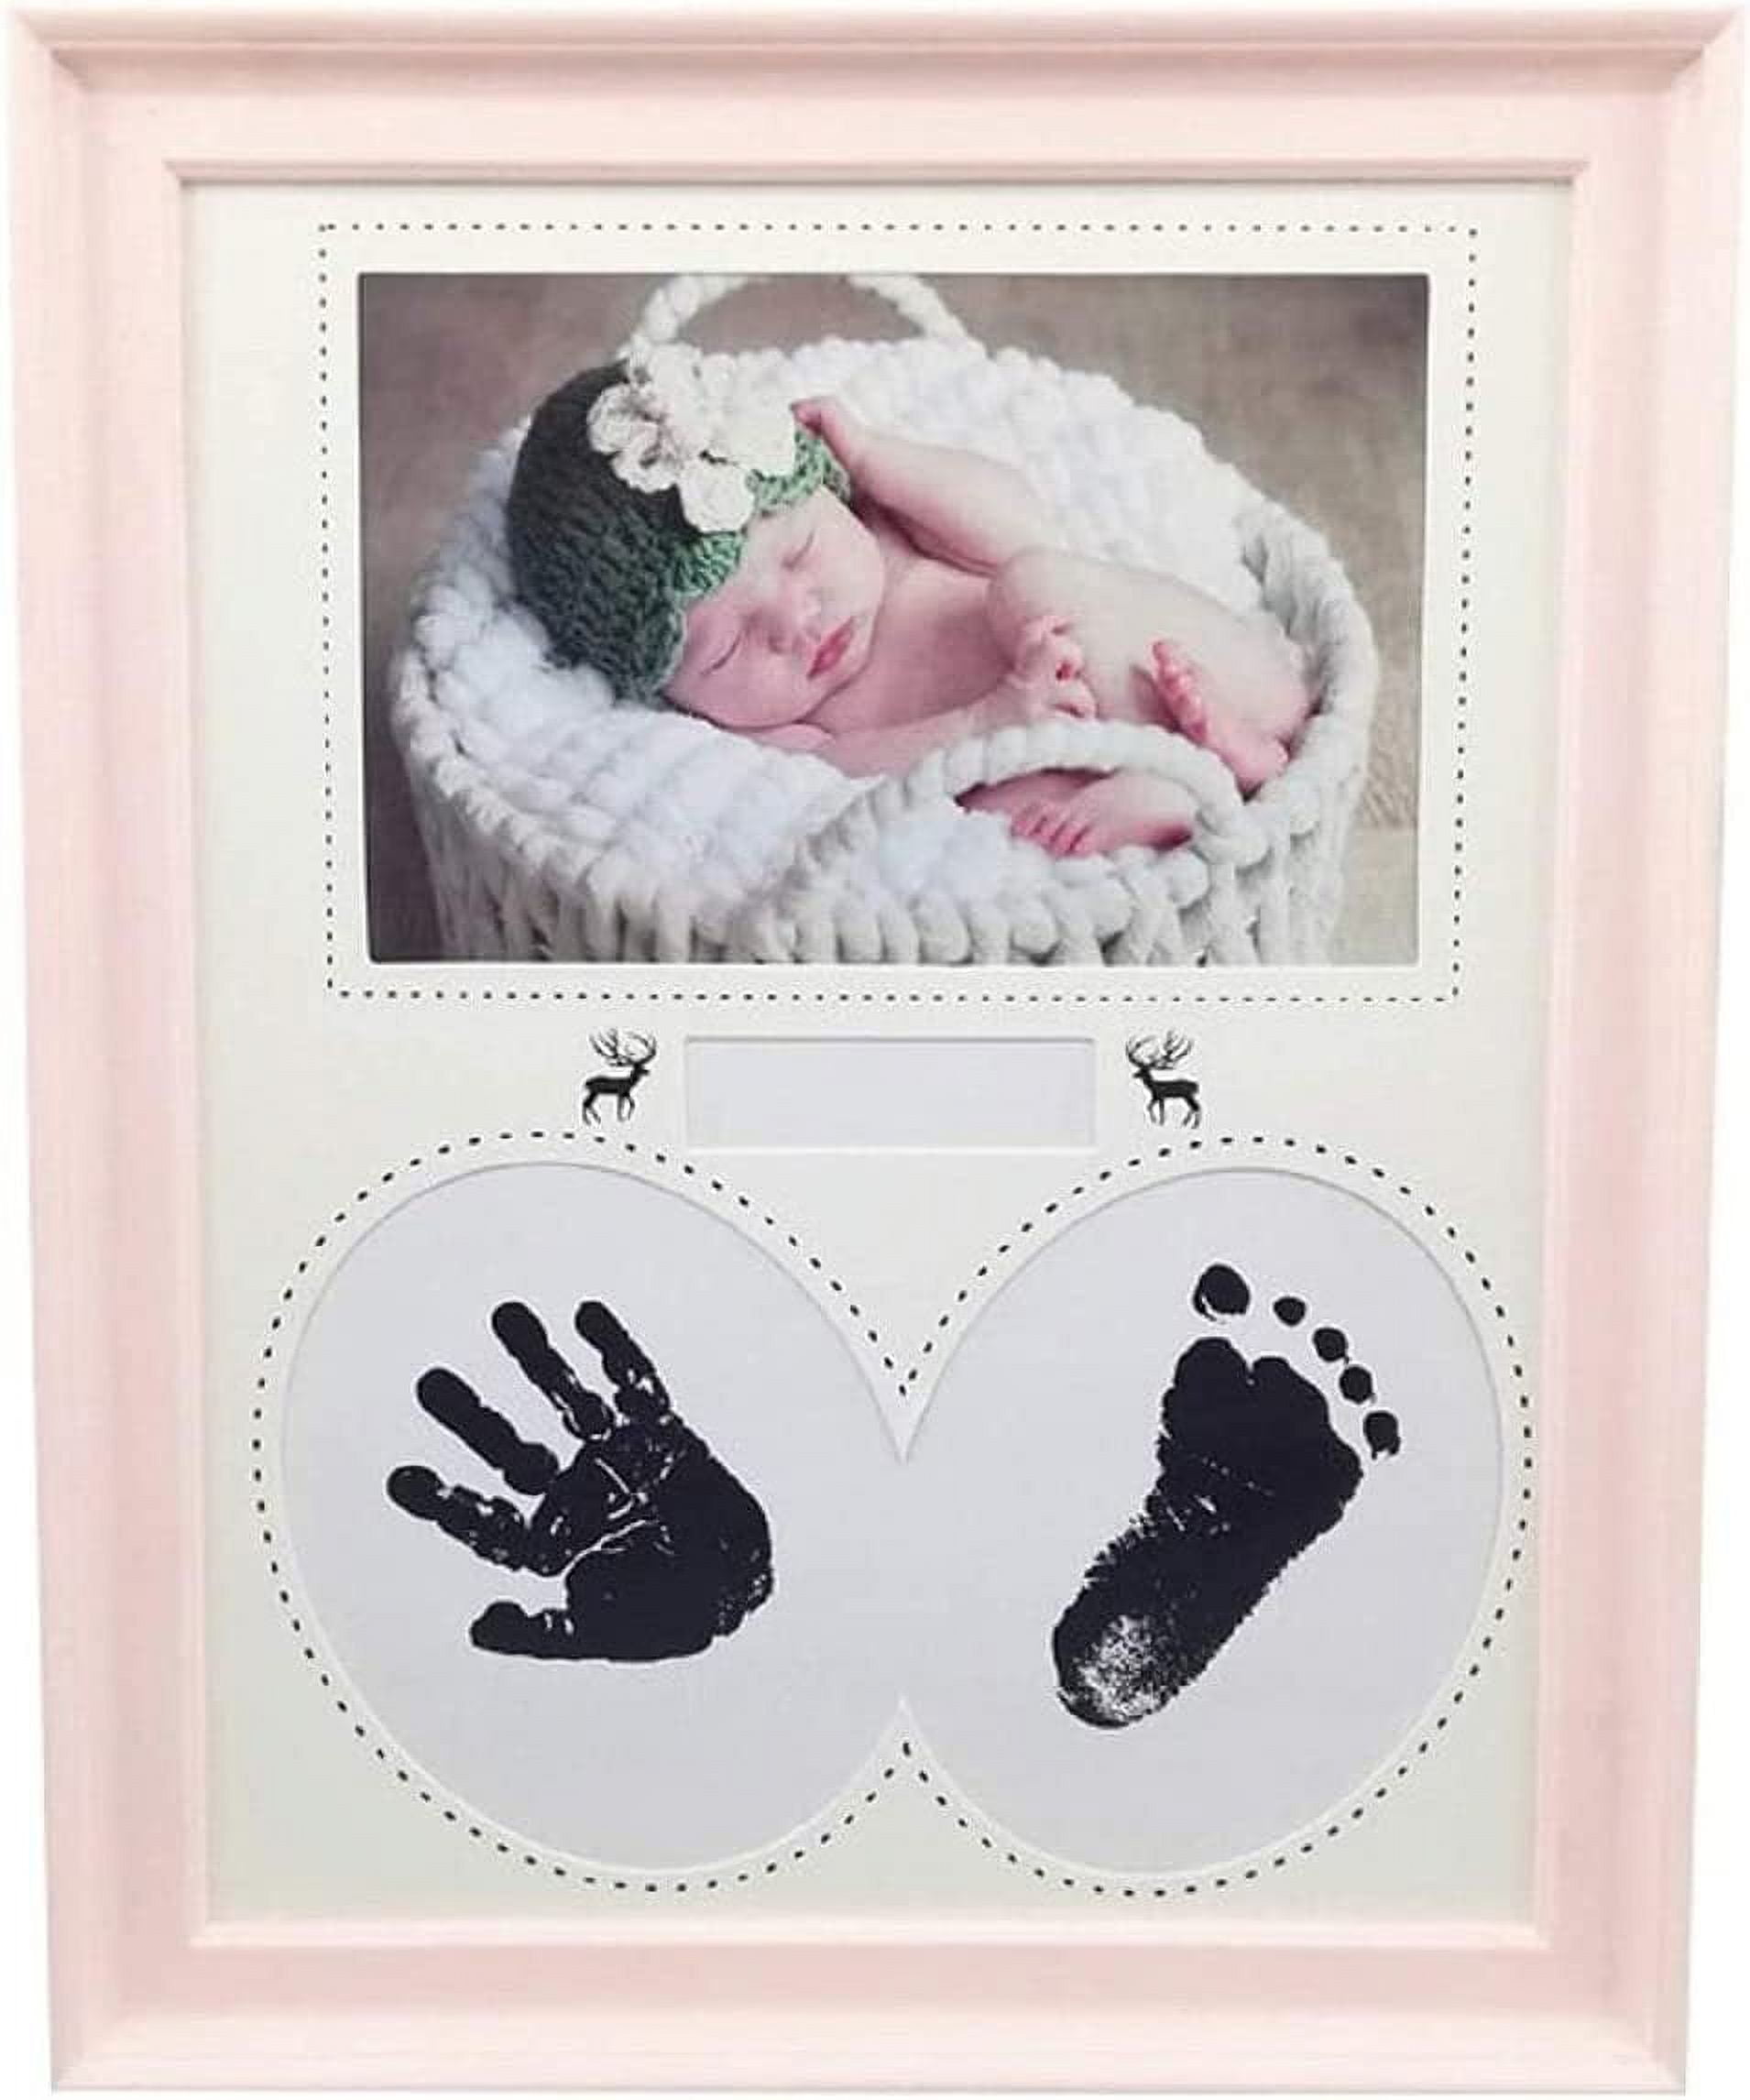 Baby Hand and Footprint Kit, New Born Baby Girls Gift, Registry for Baby,  Gender Reveal Gifts, Baby Footprint Kit, Gifts for New Mom, Newborn Gifts,  Baby Keepsake, Pink, 11x9.1x0.6 Inch 